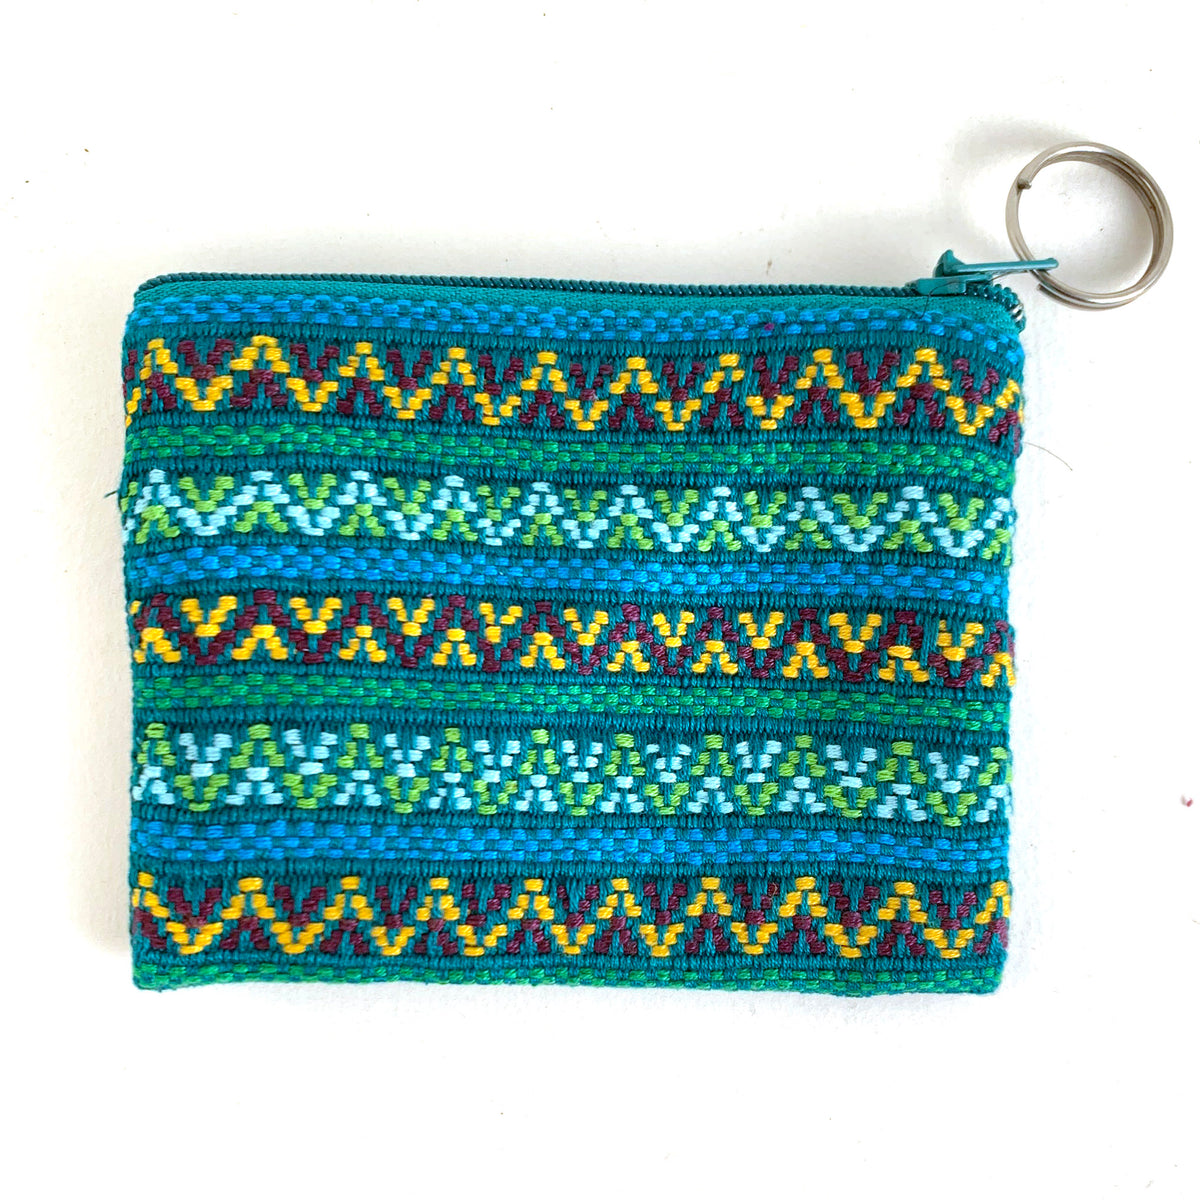 Small Zipper Pouch with Keyring in Santiago Brocade